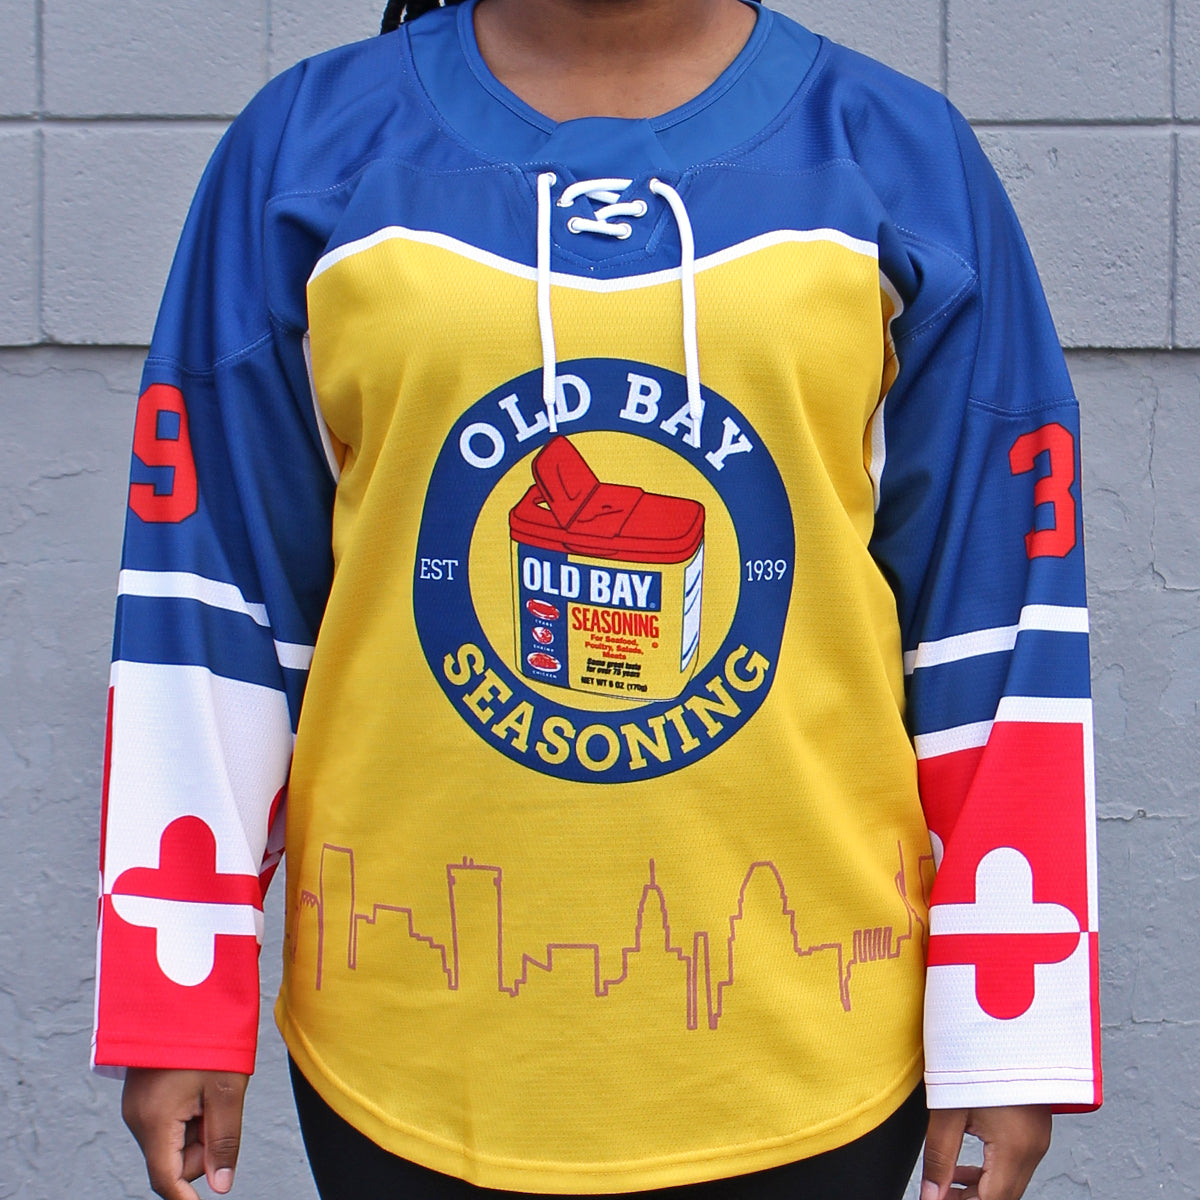 Custom Navy Red-Old Gold Hockey Jersey Discount